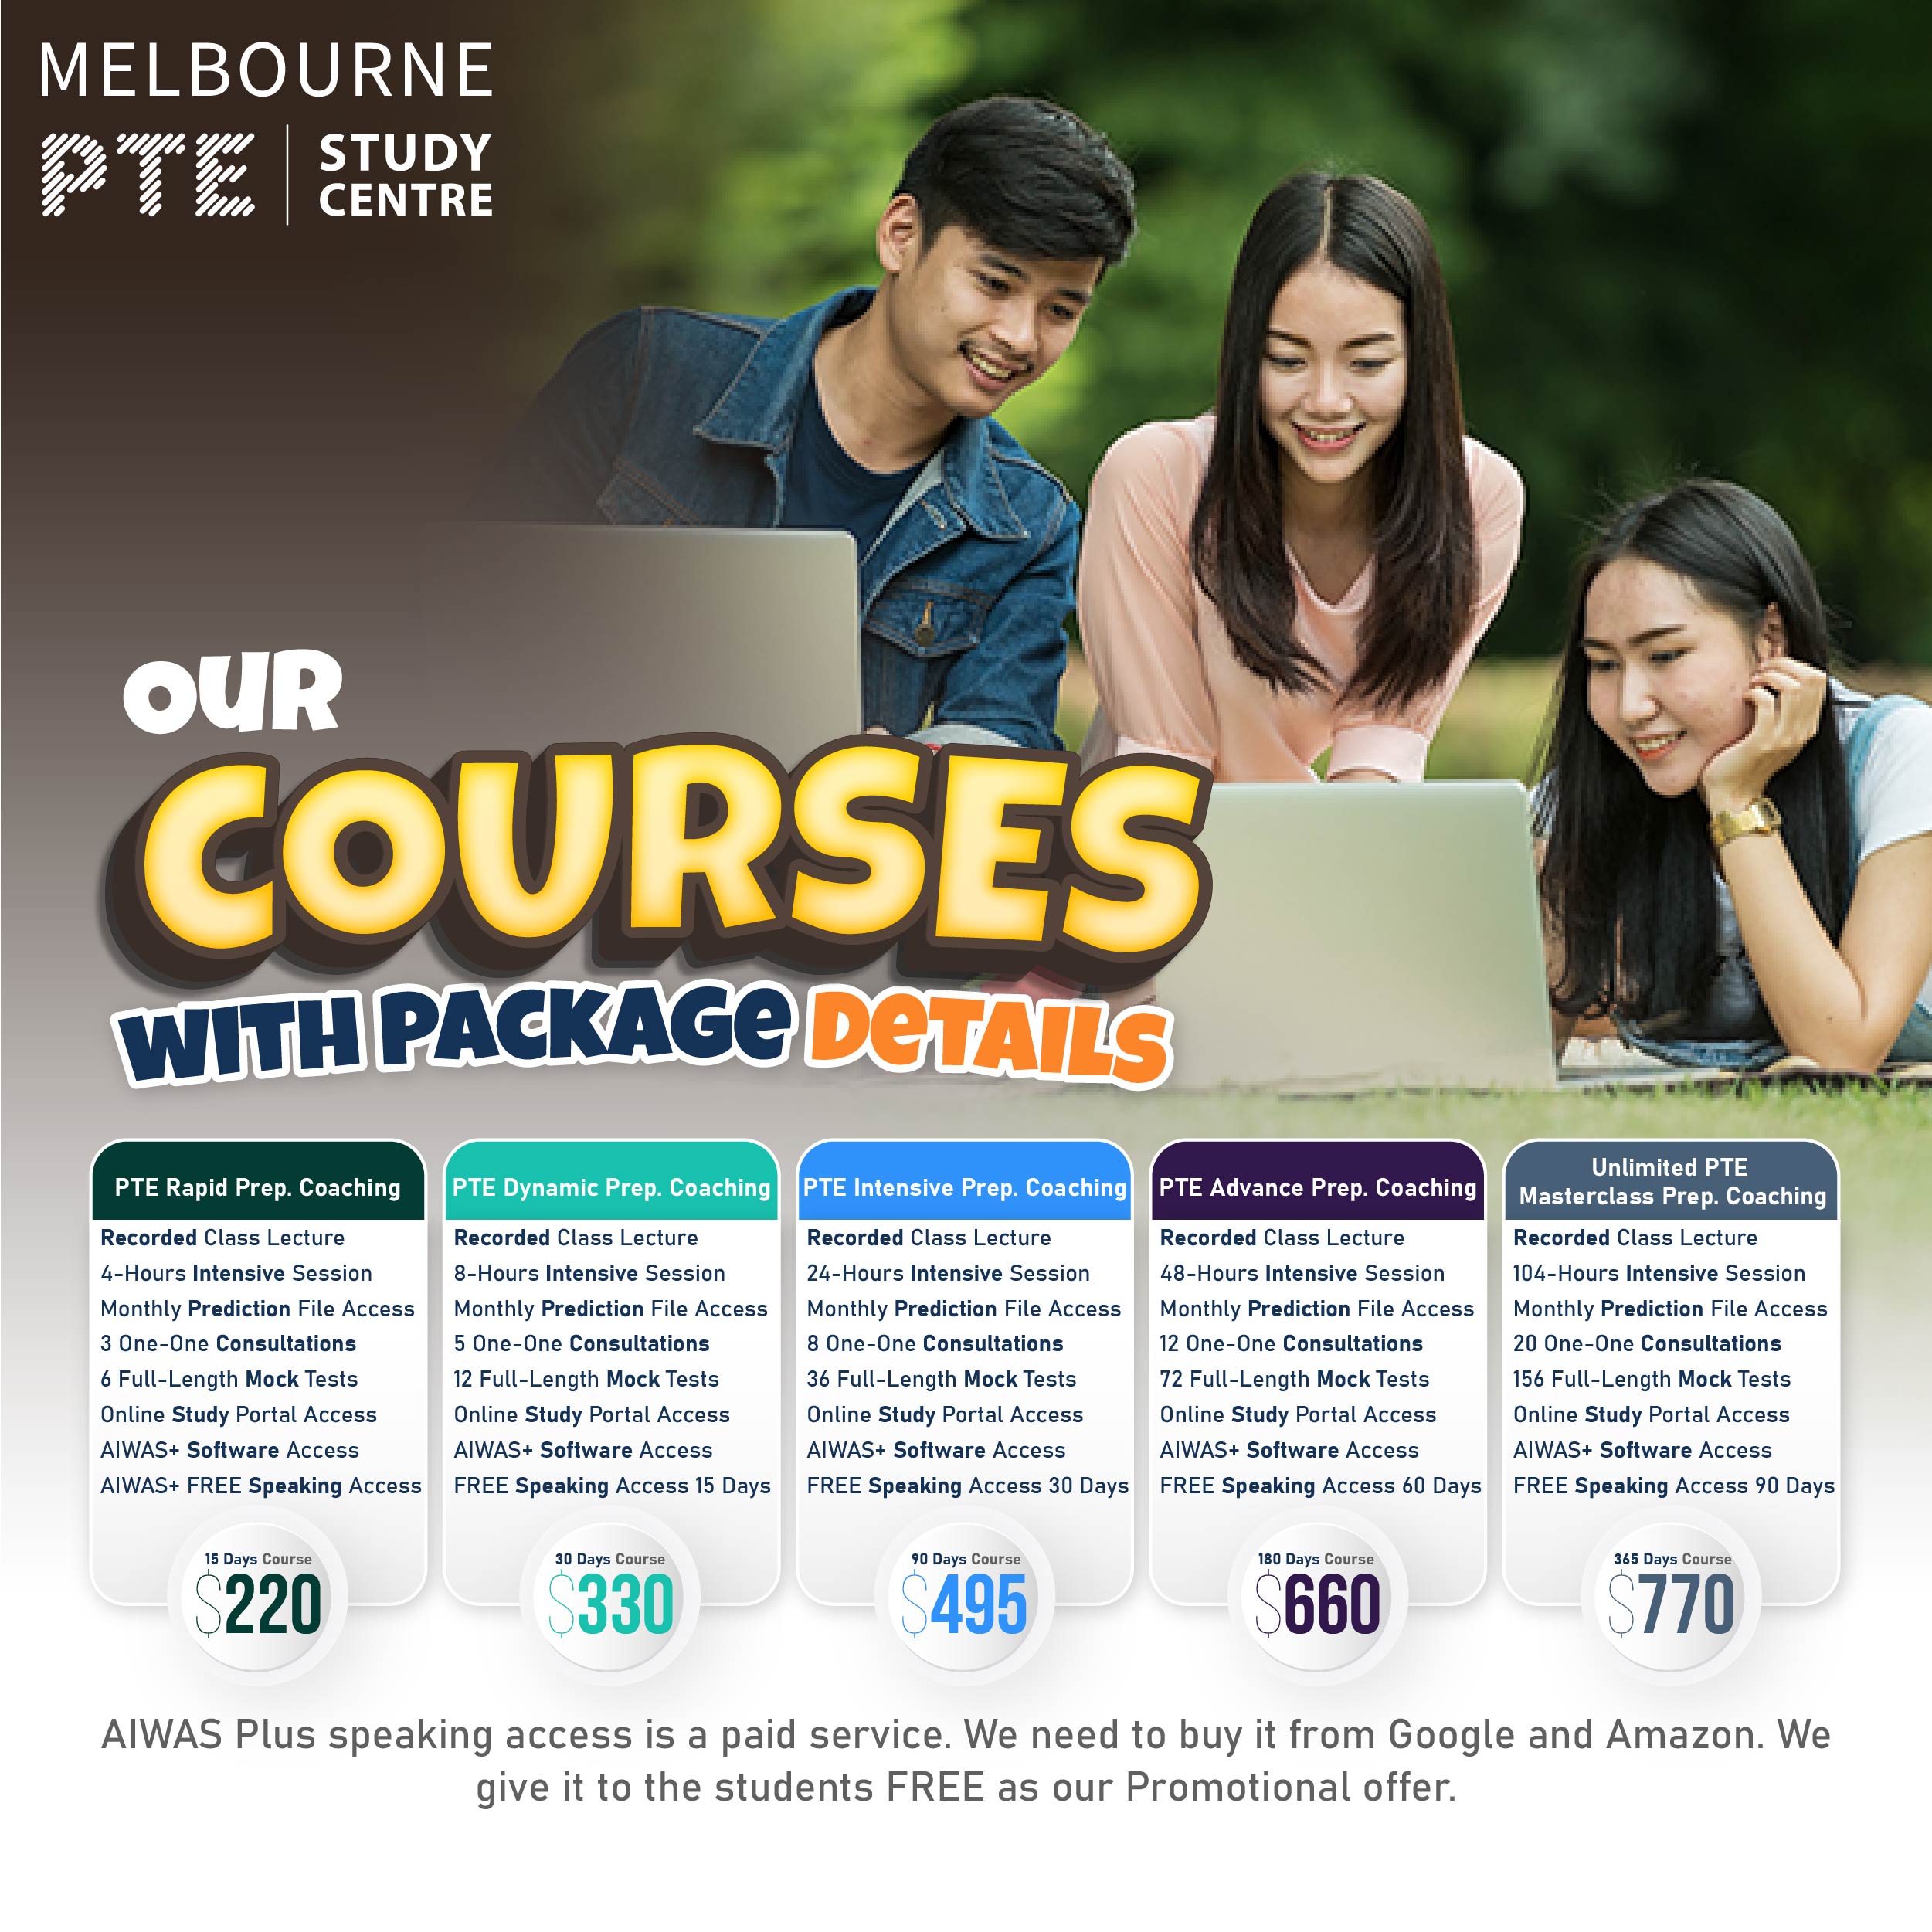 All course package details